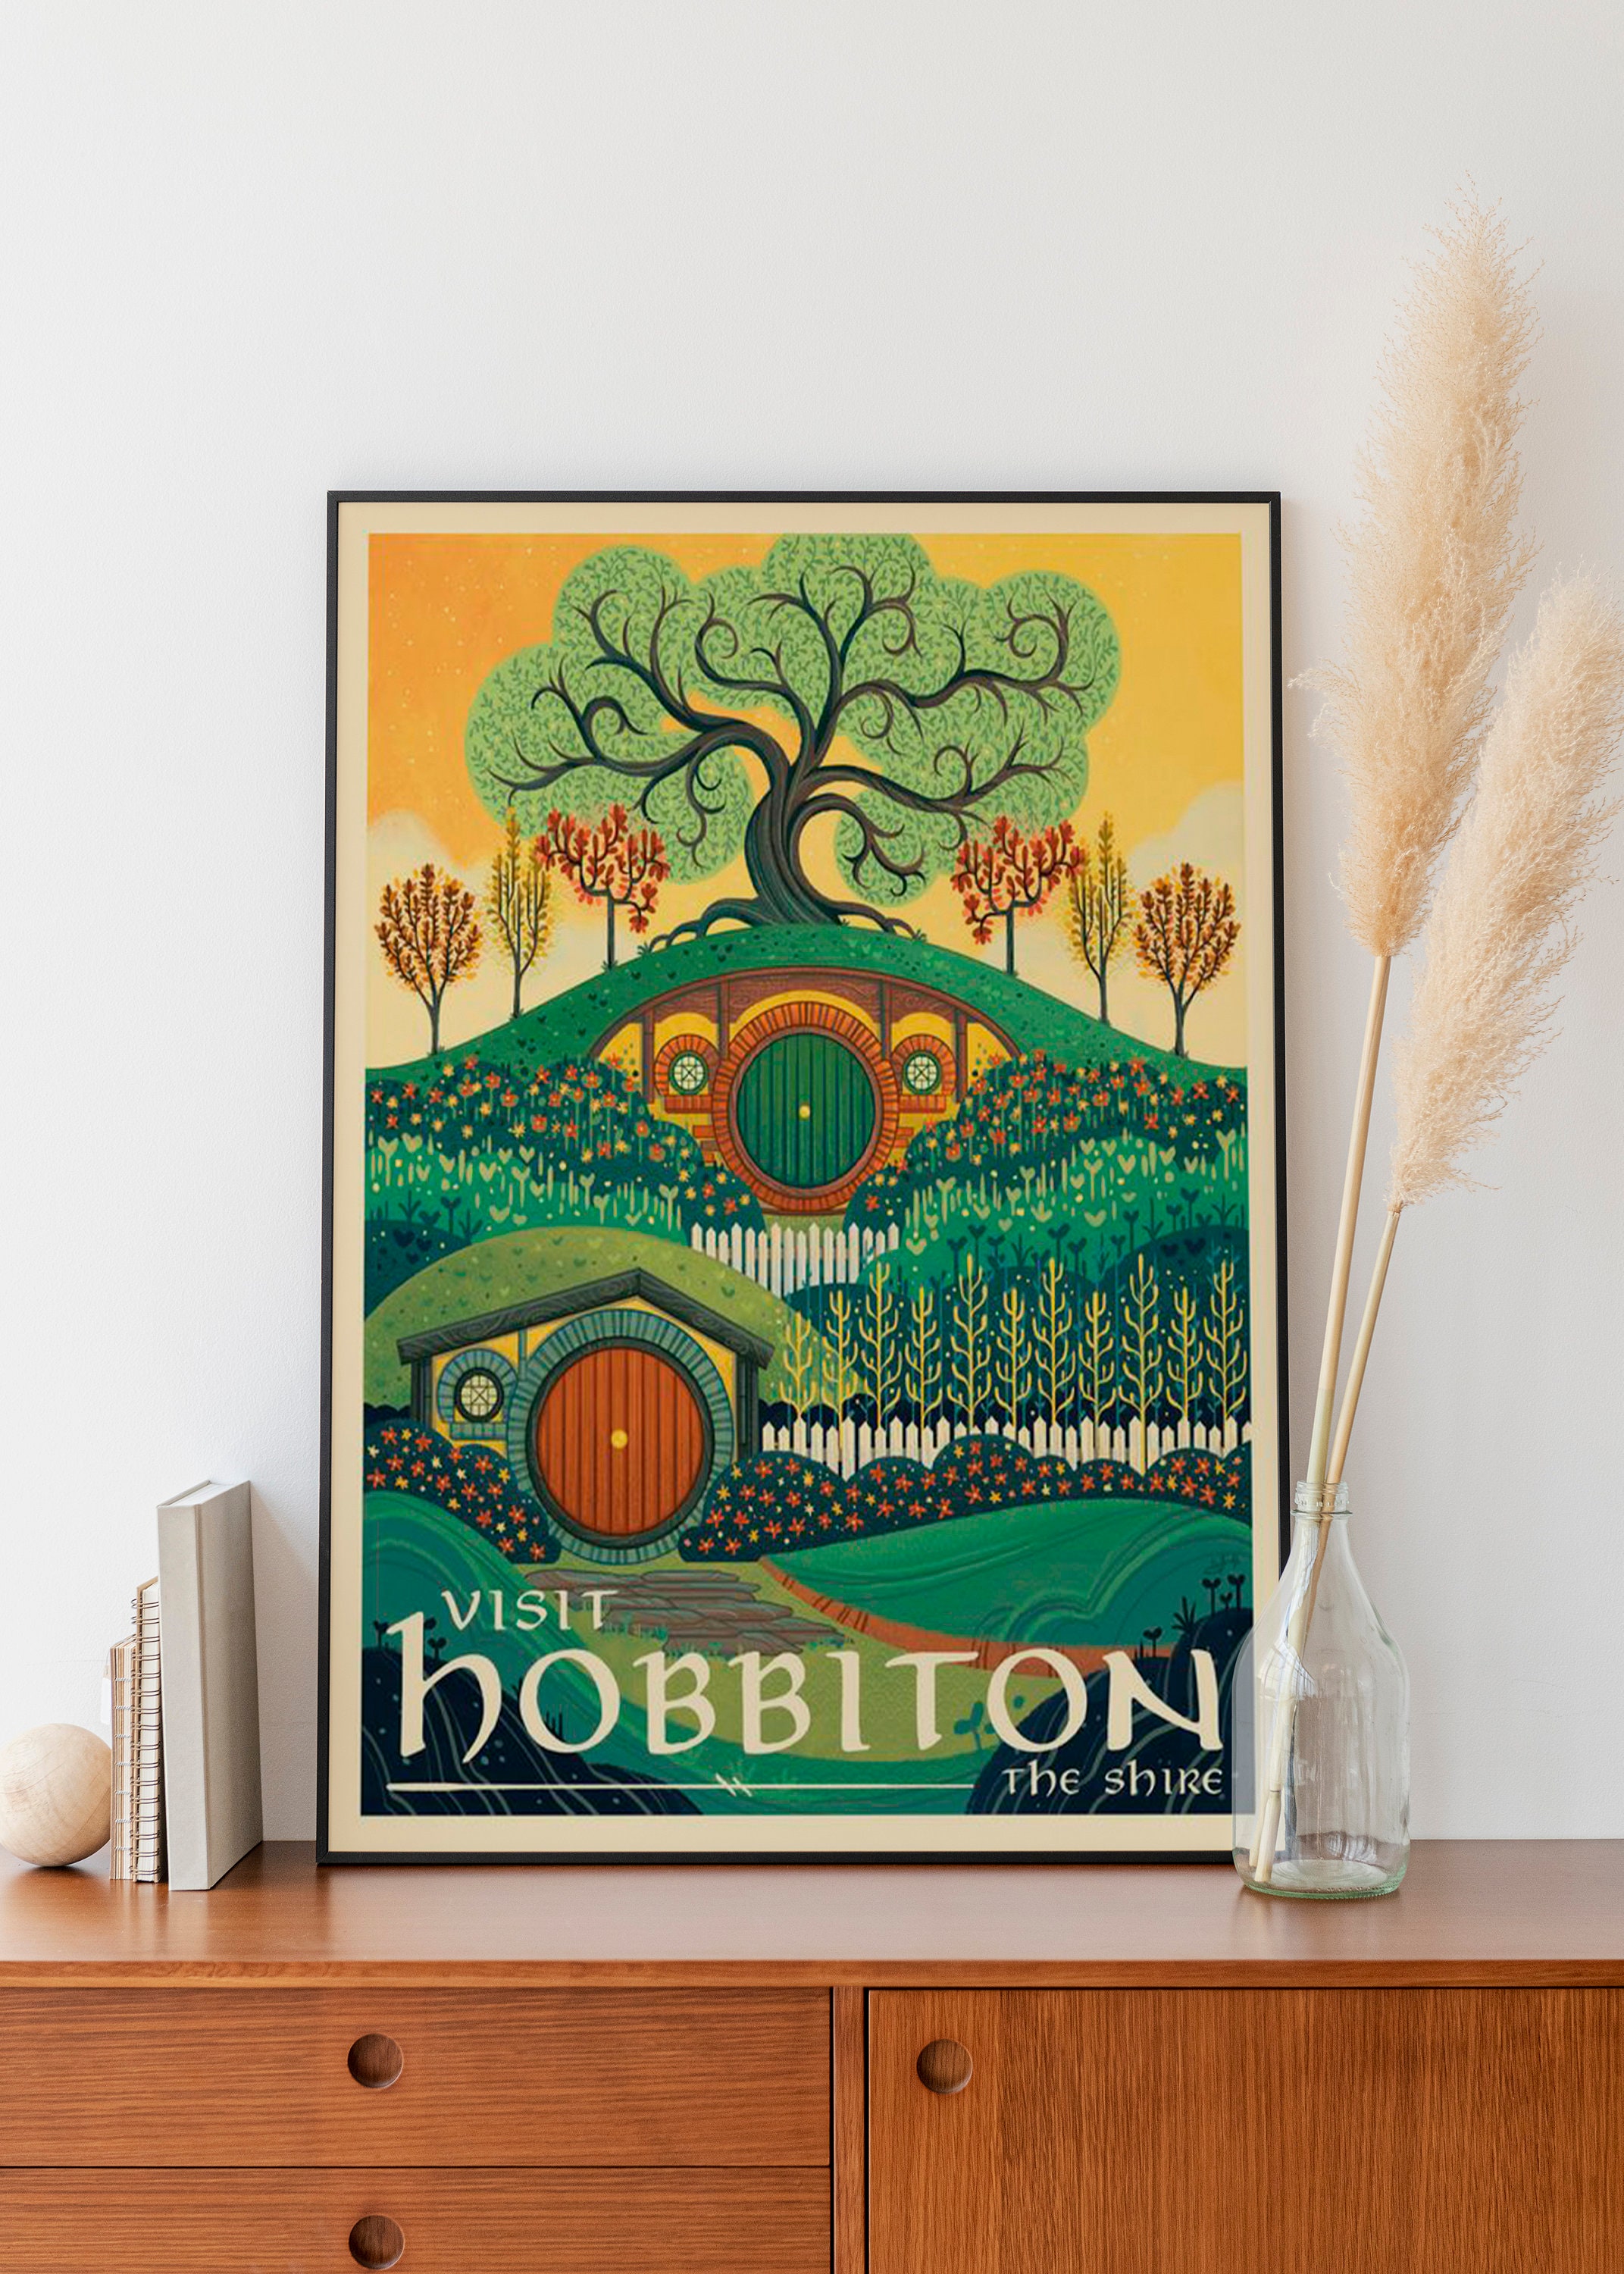 Lord of the Rings Hobbiton Art Poster sold by Gillian Graber | SKU 42175960  | 50% OFF Printerval